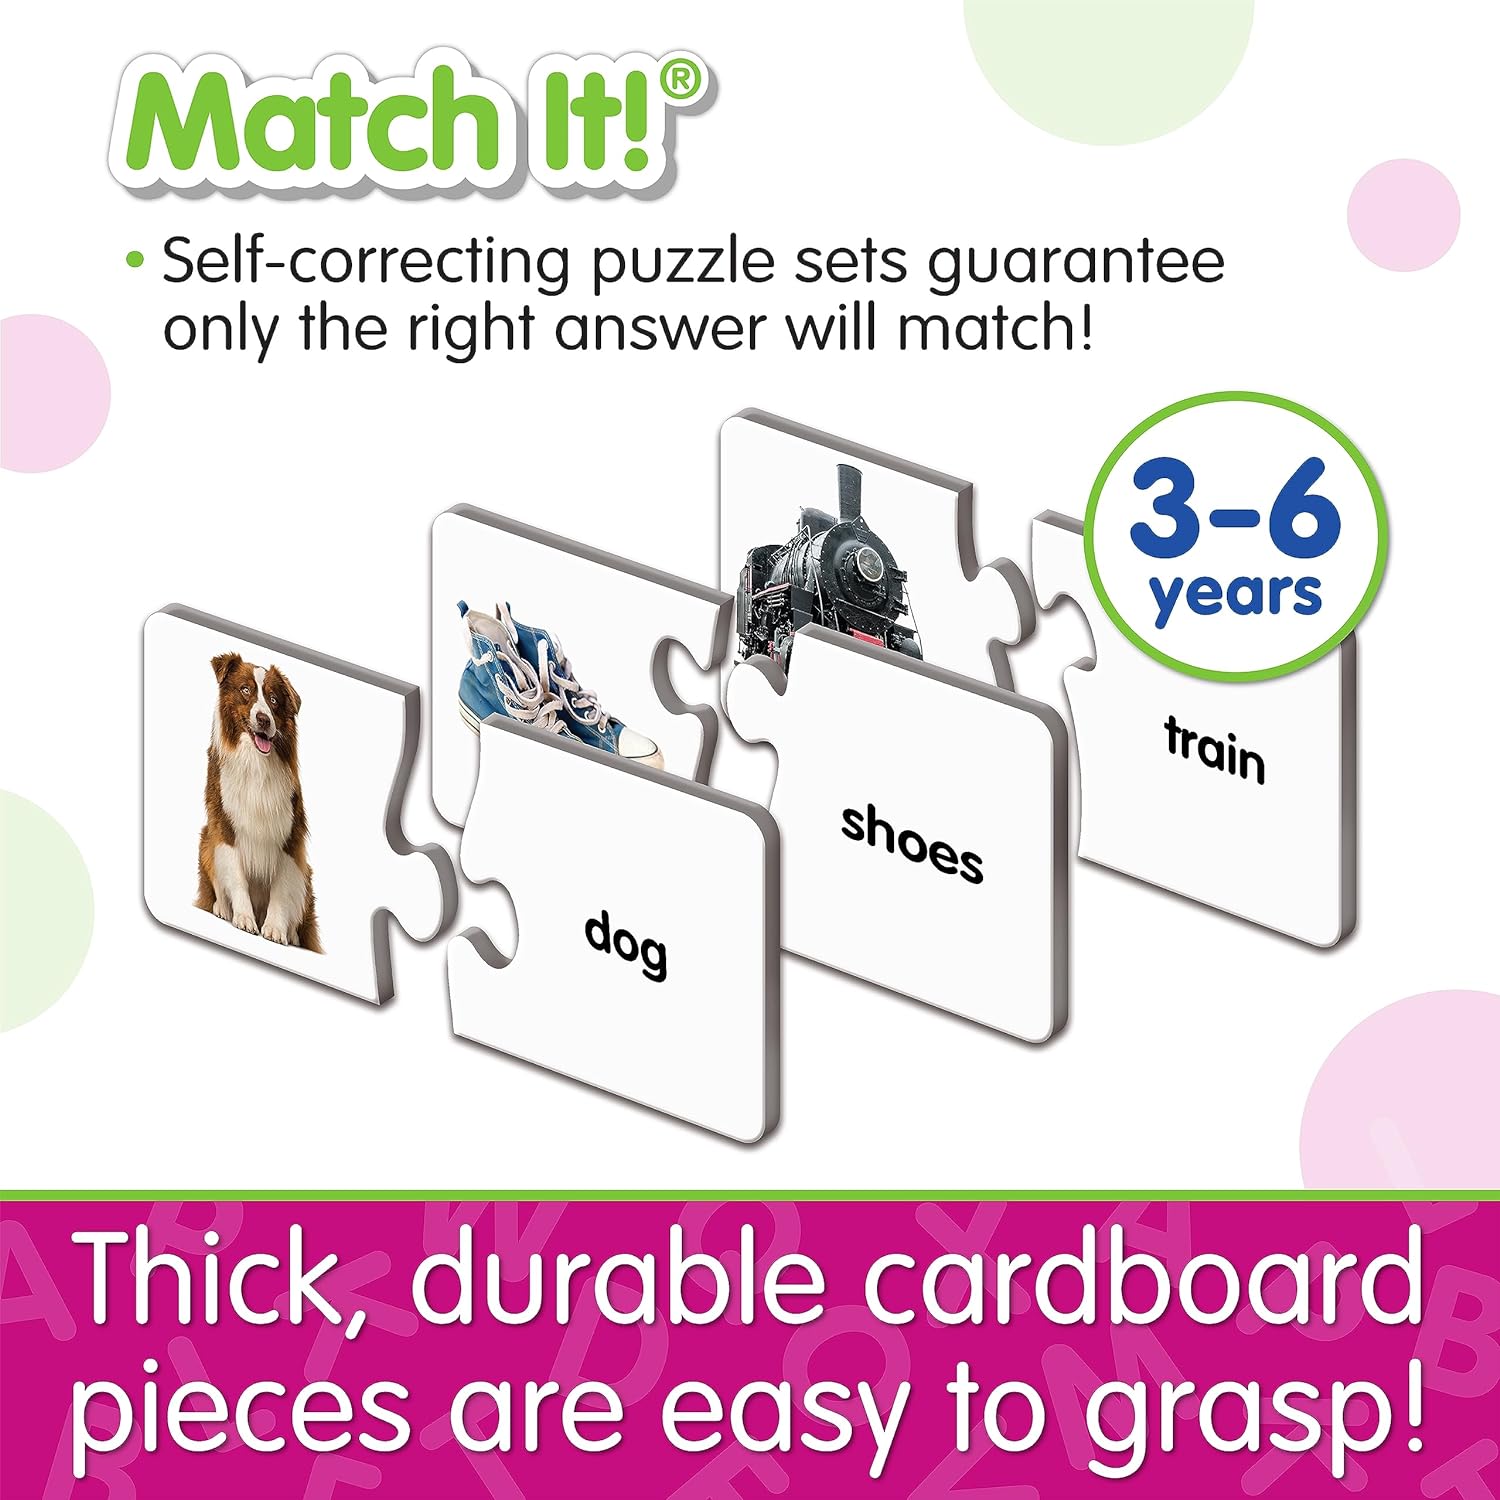 The Learning Journey: Match It! First Words - A Fun and Interactive Way to Teach Early Reading Skills